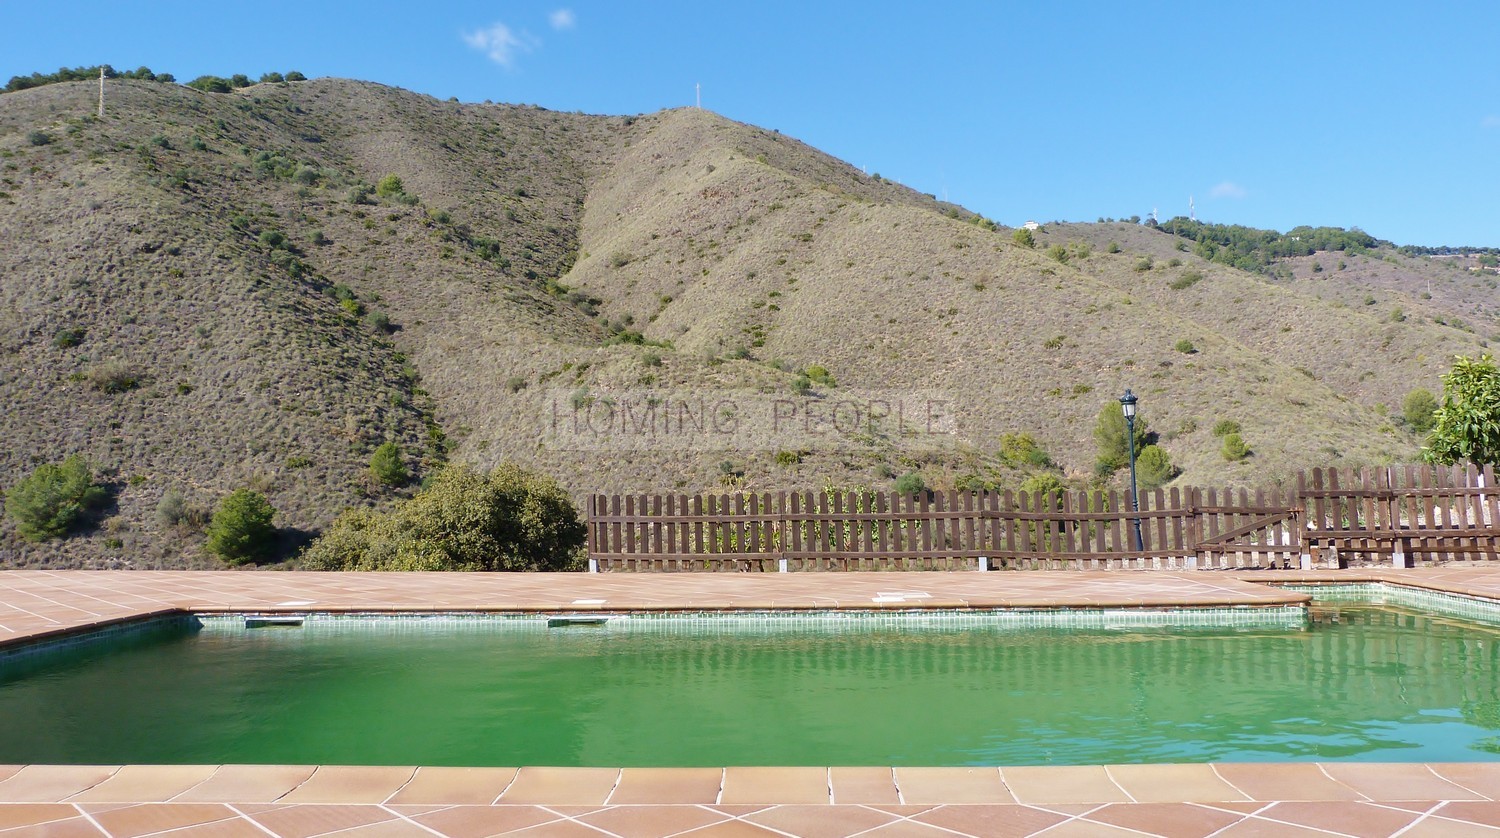 Villa, pool & high level equestrian facilities within 10 hectars of land & only 10 minutes' reach from the city!